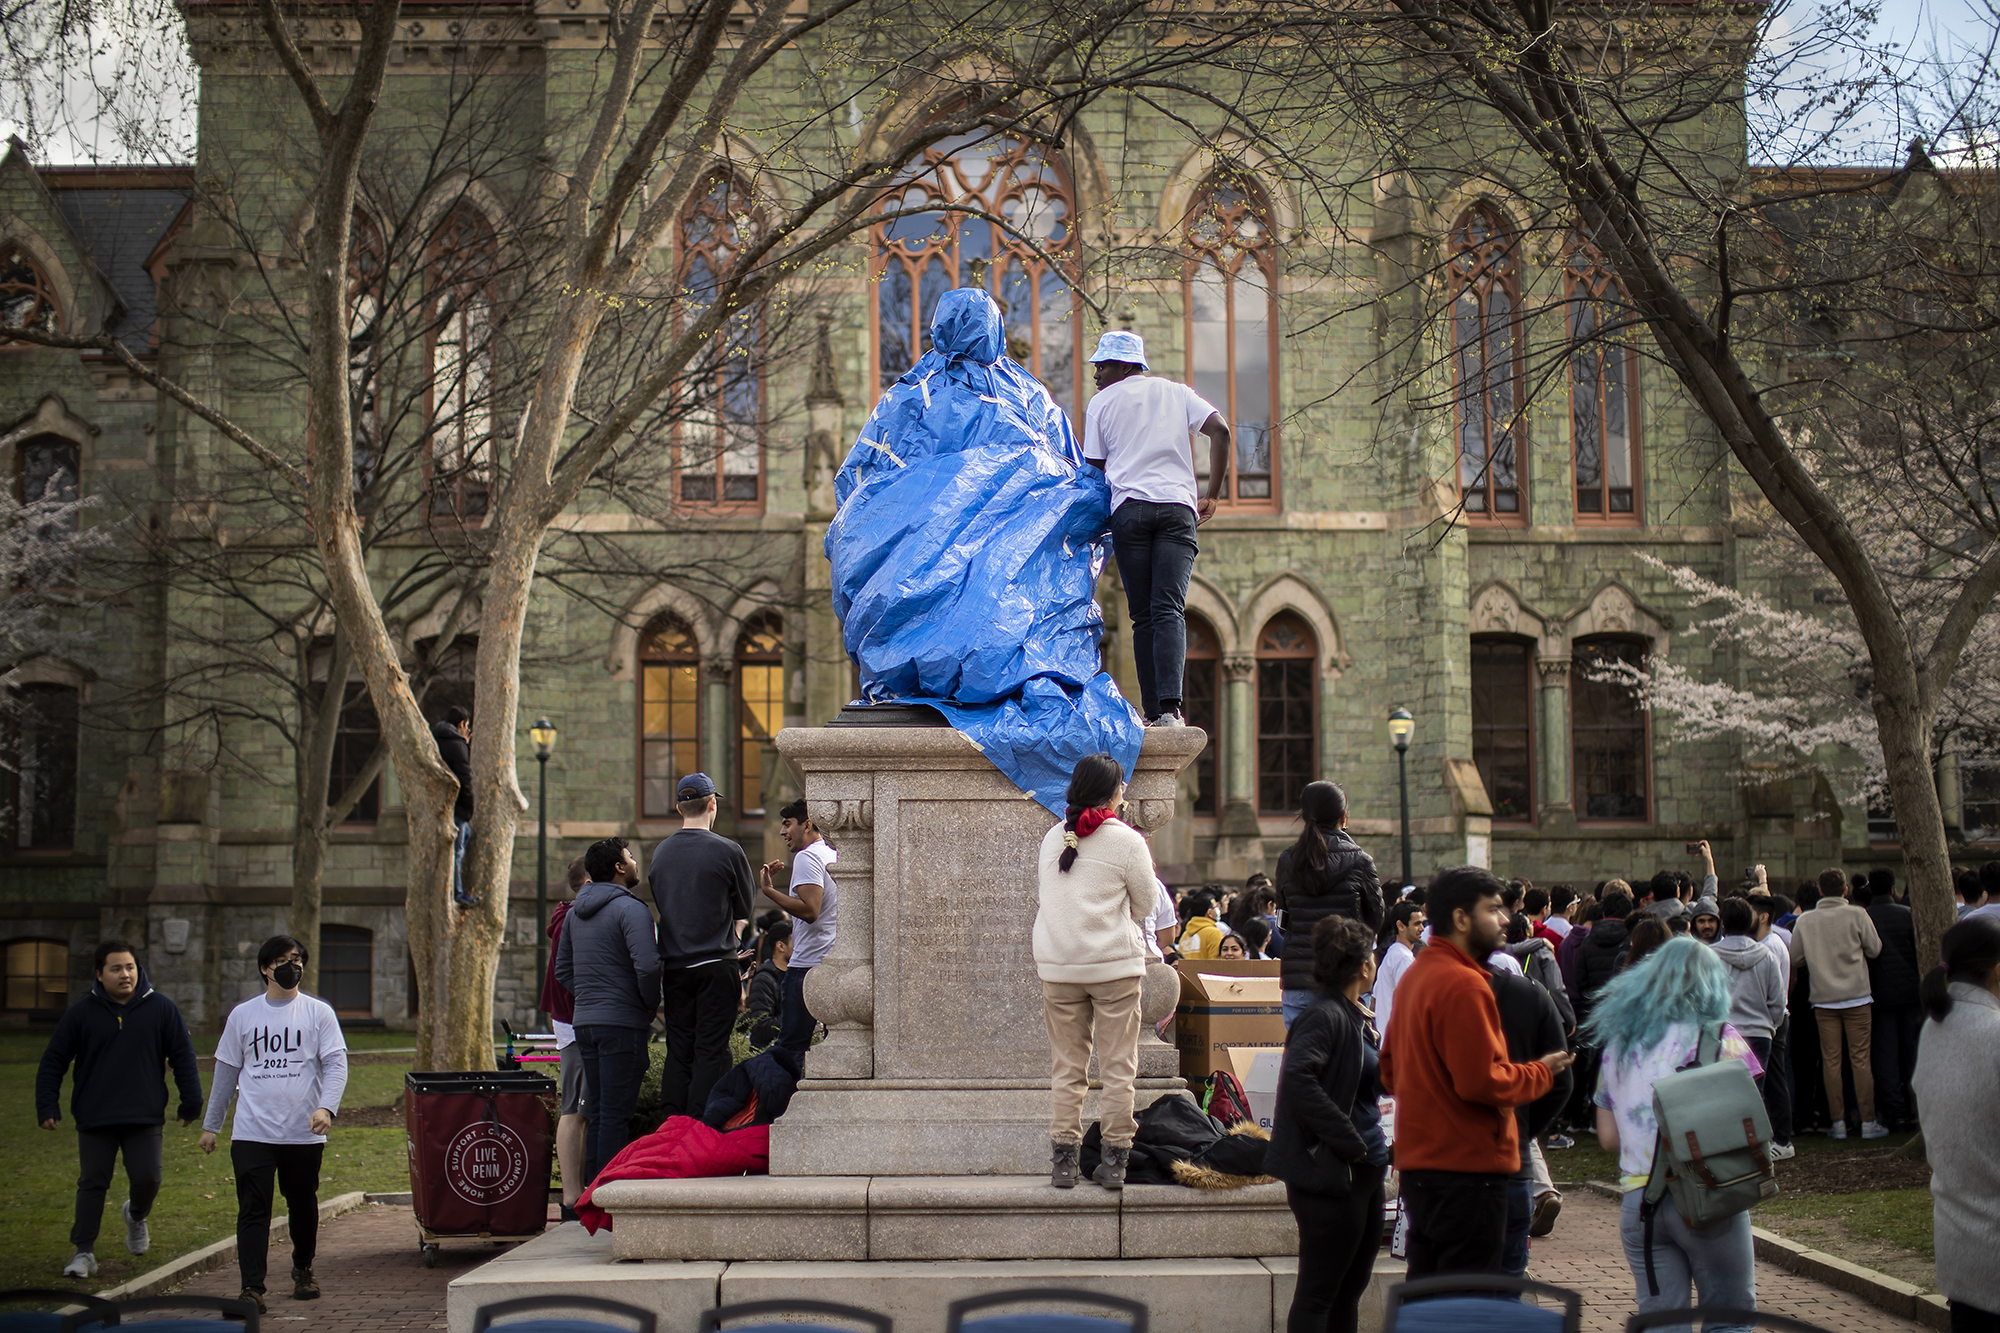 Students cover the statue of Ben Franklin in front of College Hall with a tarp.